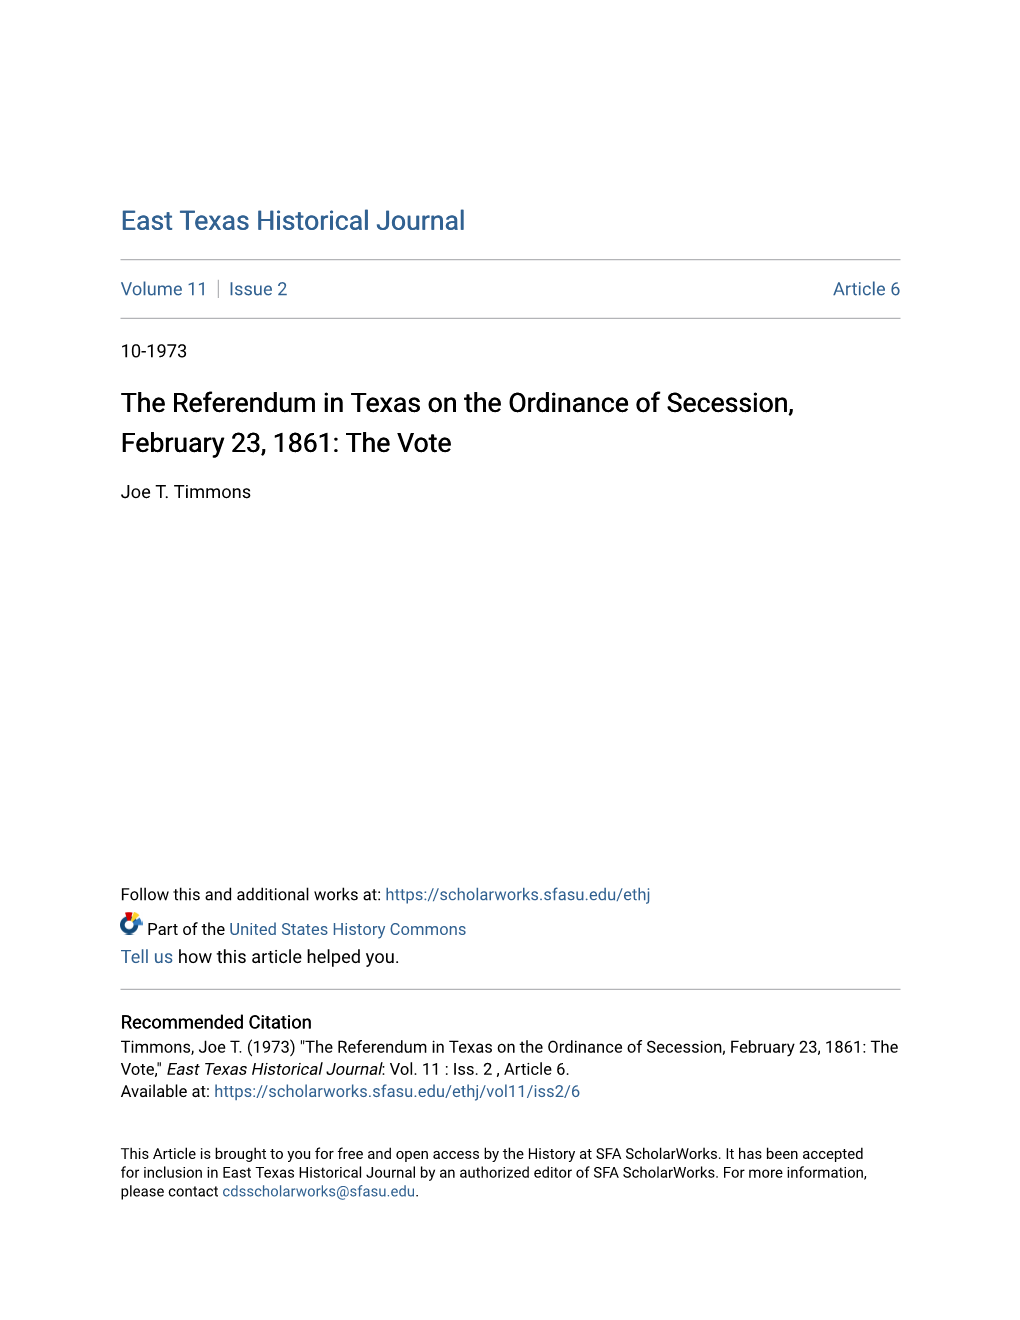 The Referendum in Texas on the Ordinance of Secession, February 23, 1861: the Vote